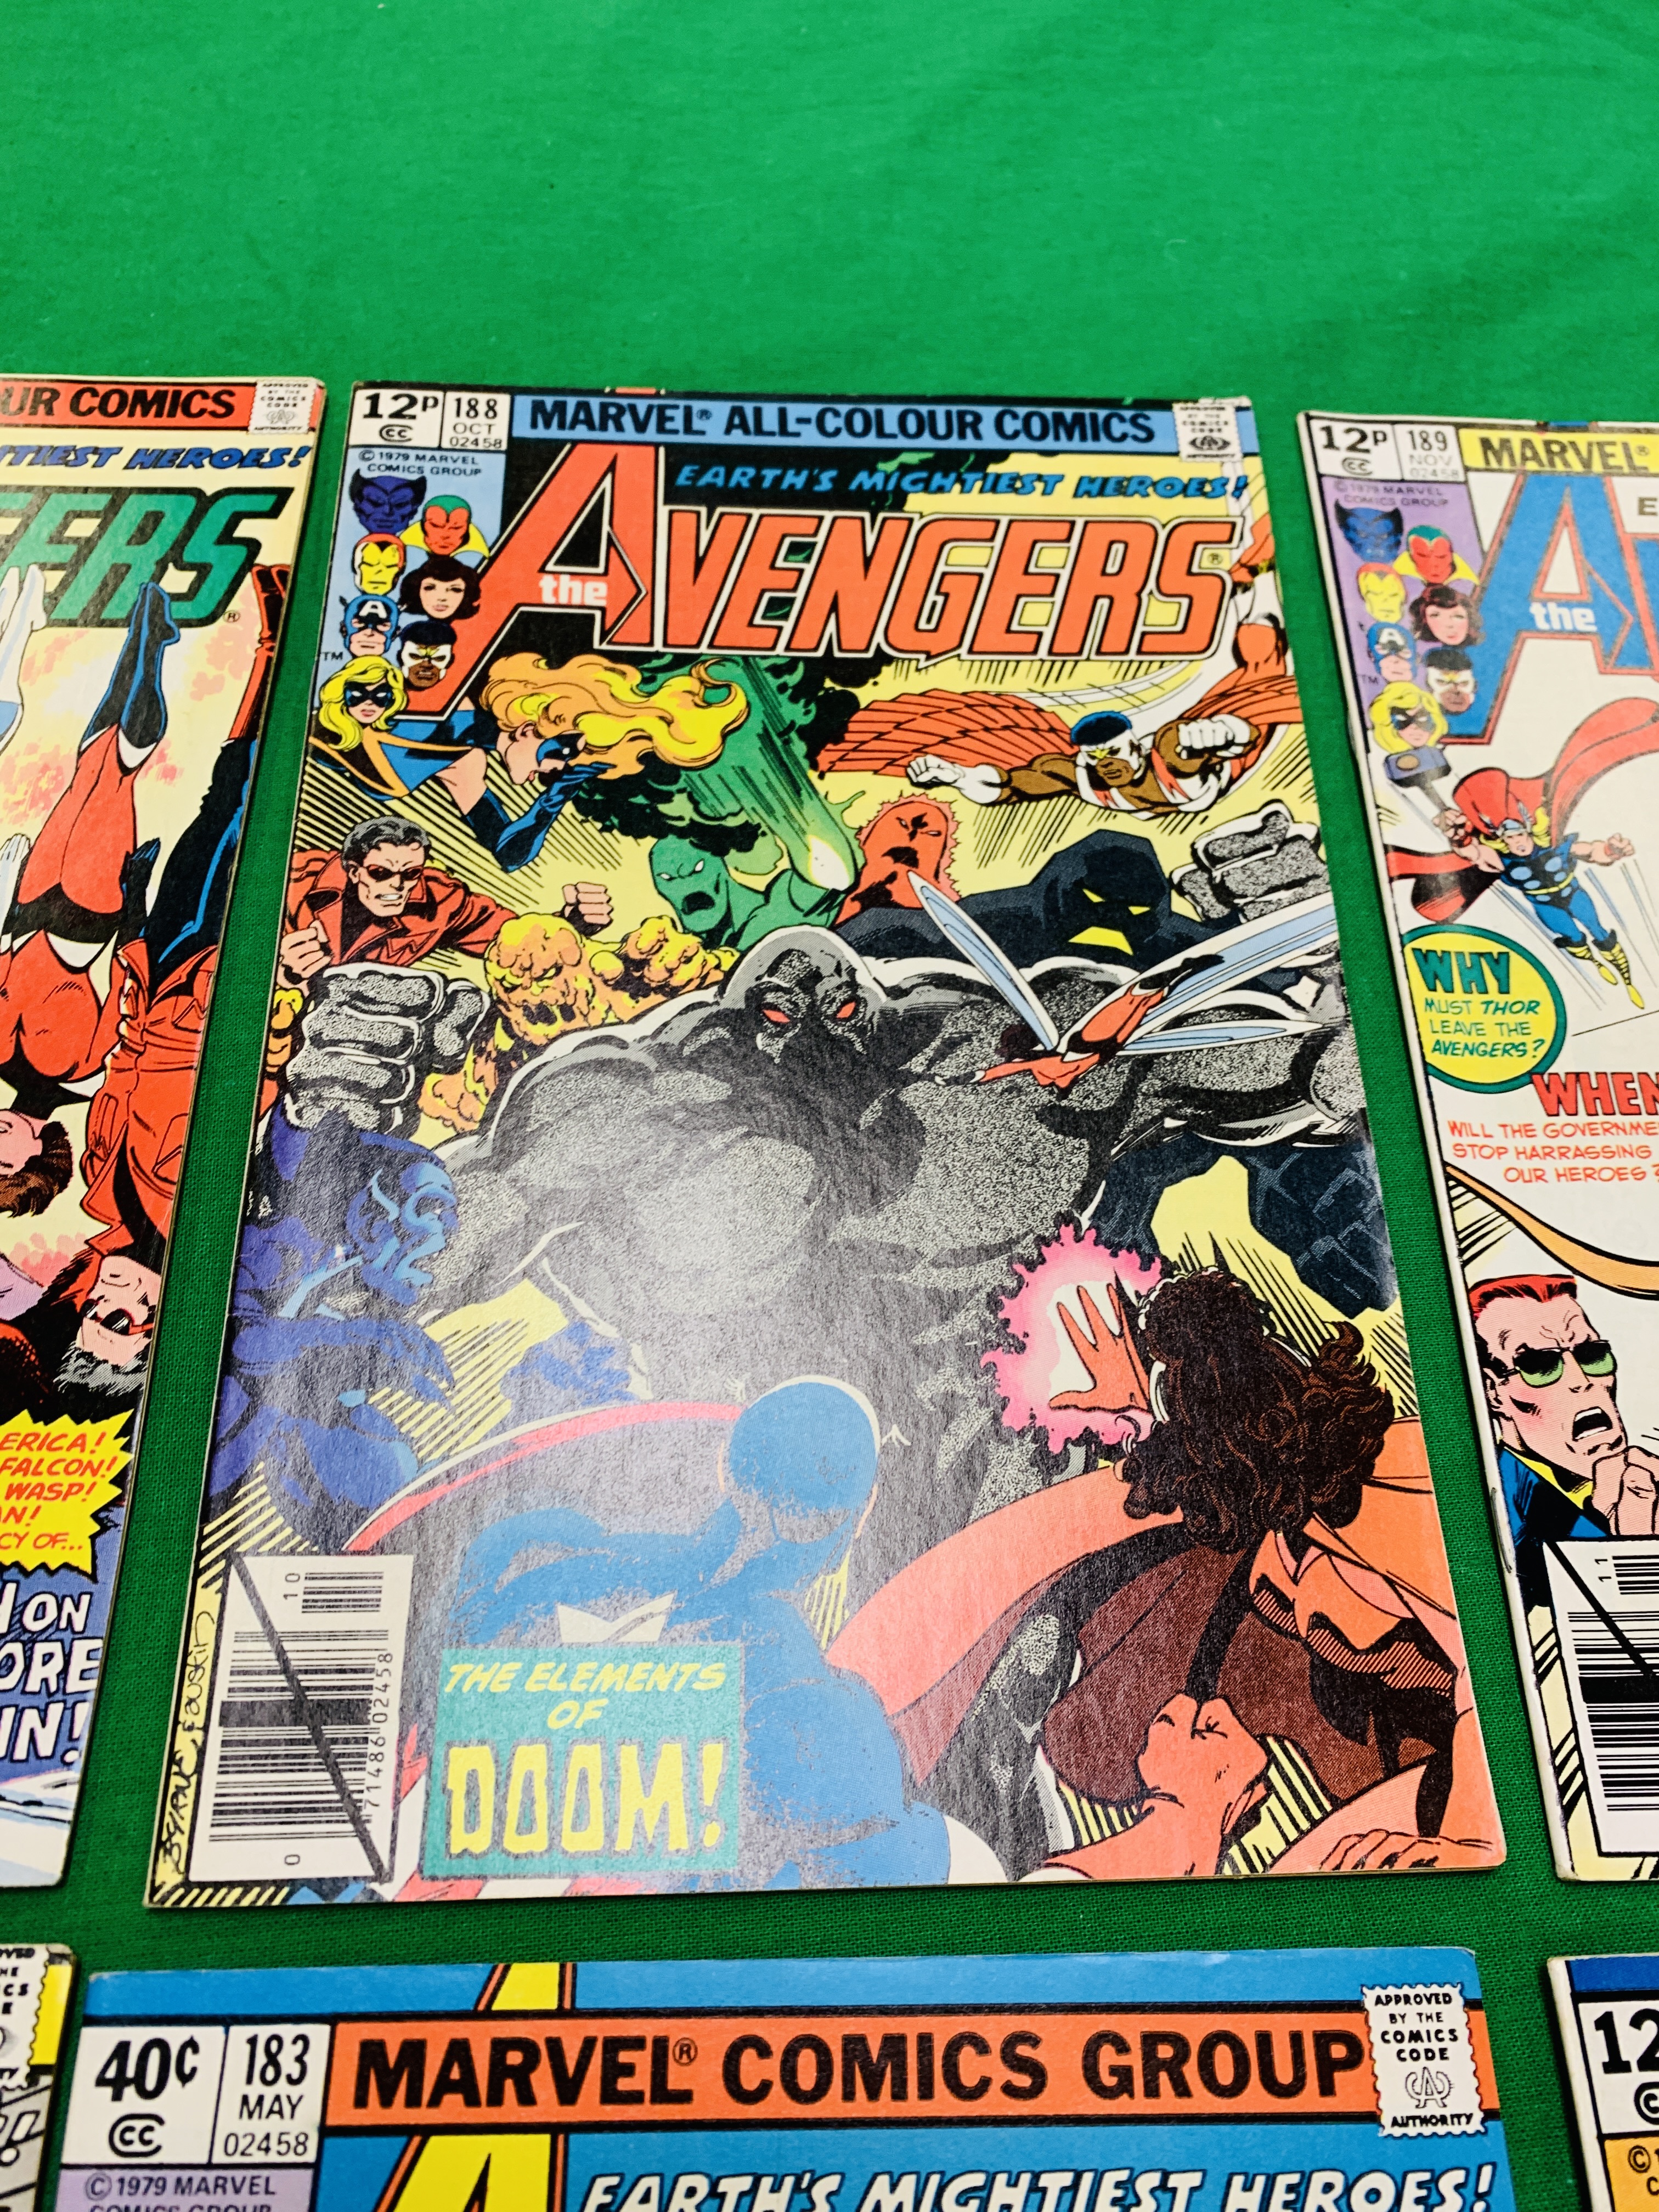 MARVEL COMICS THE AVENGERS NO. 101 - 299, MISSING ISSUES 103 AND 110. - Image 65 of 130